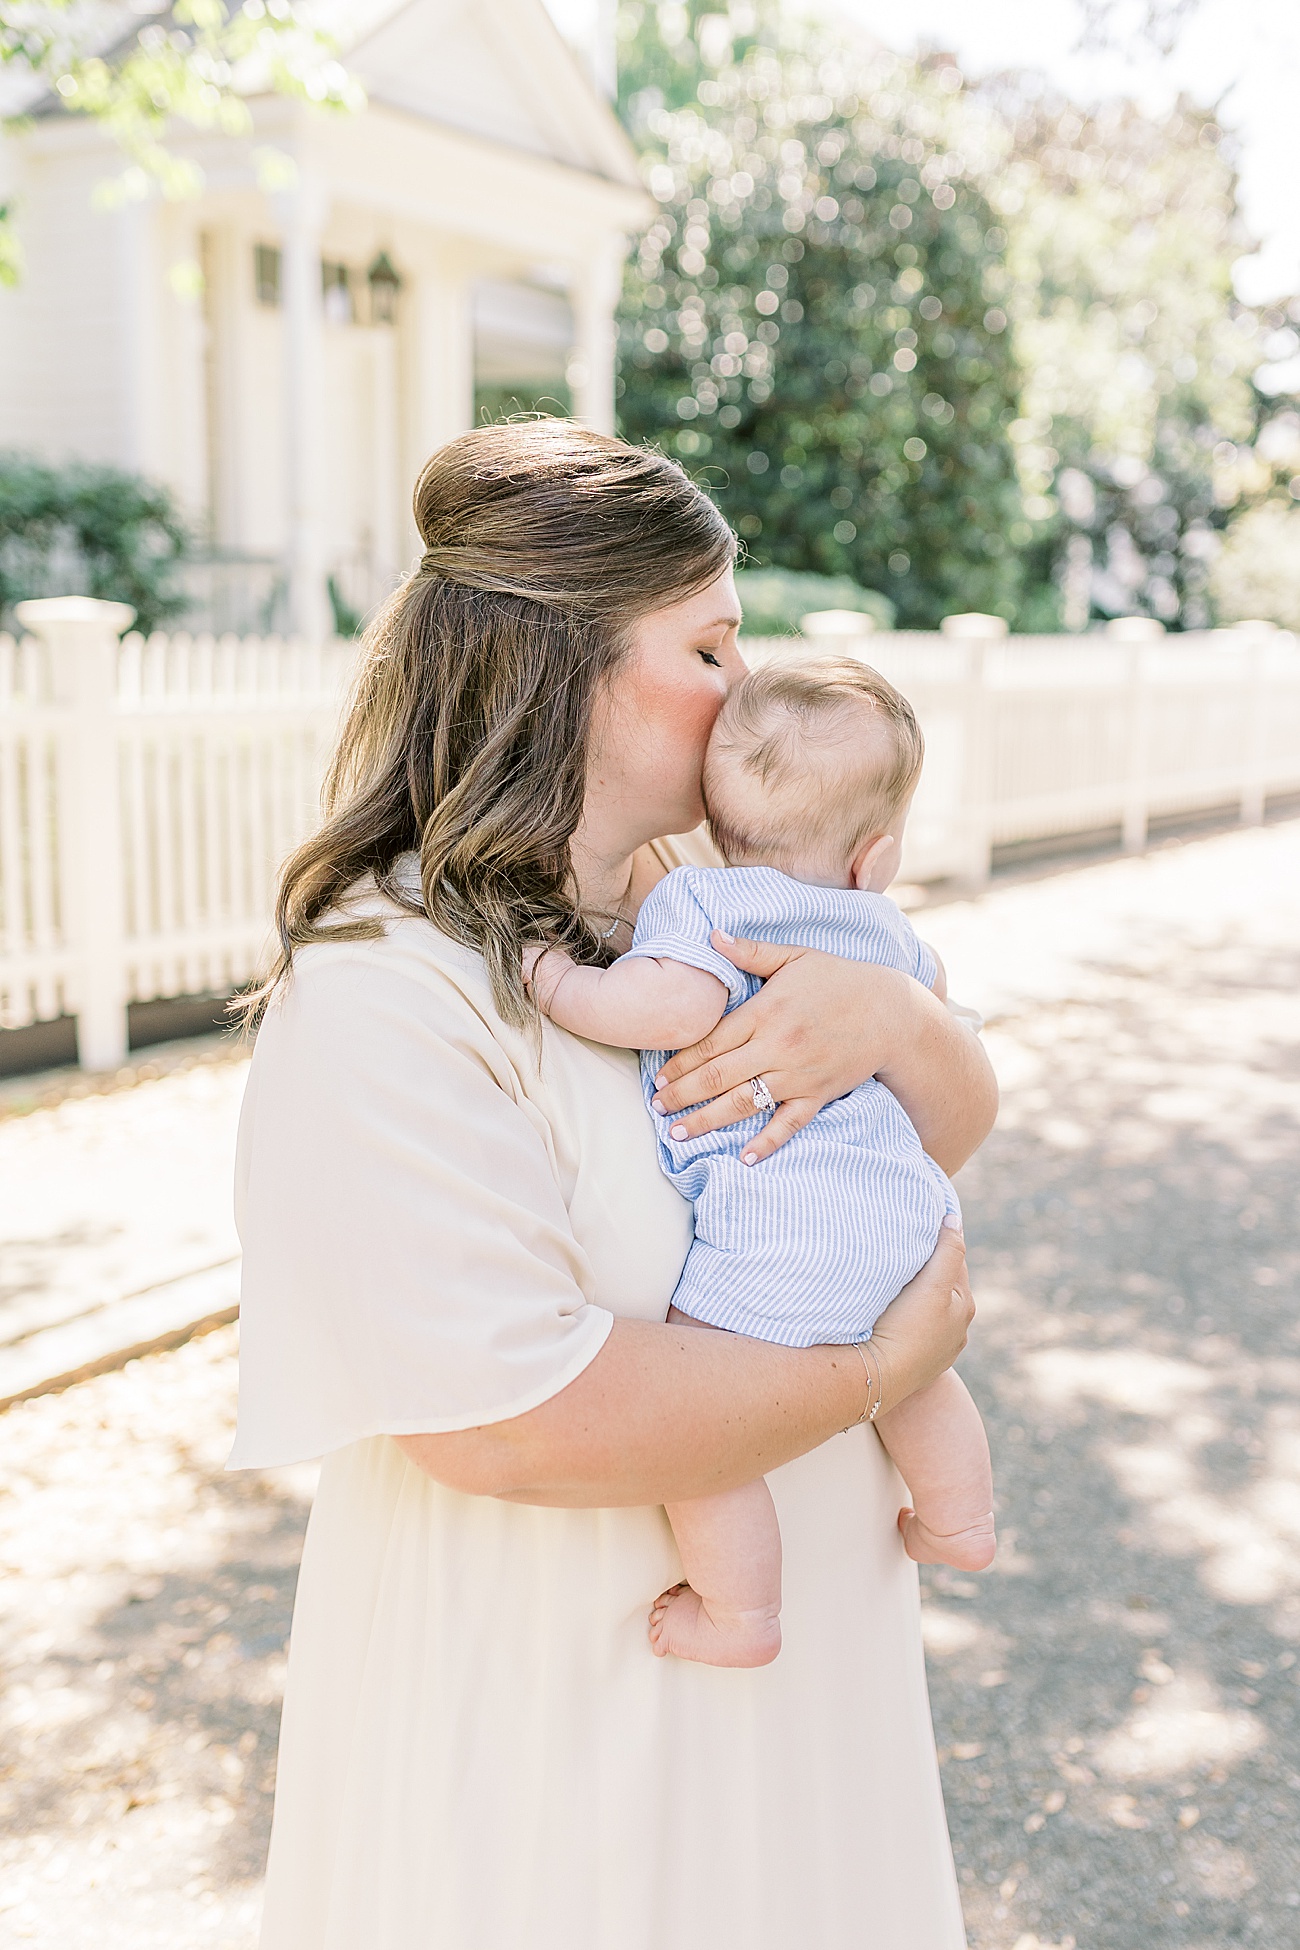 Mom snuggling baby in Downtown Charleston during motherhood mini session event with Caitlyn Motycka Photography.